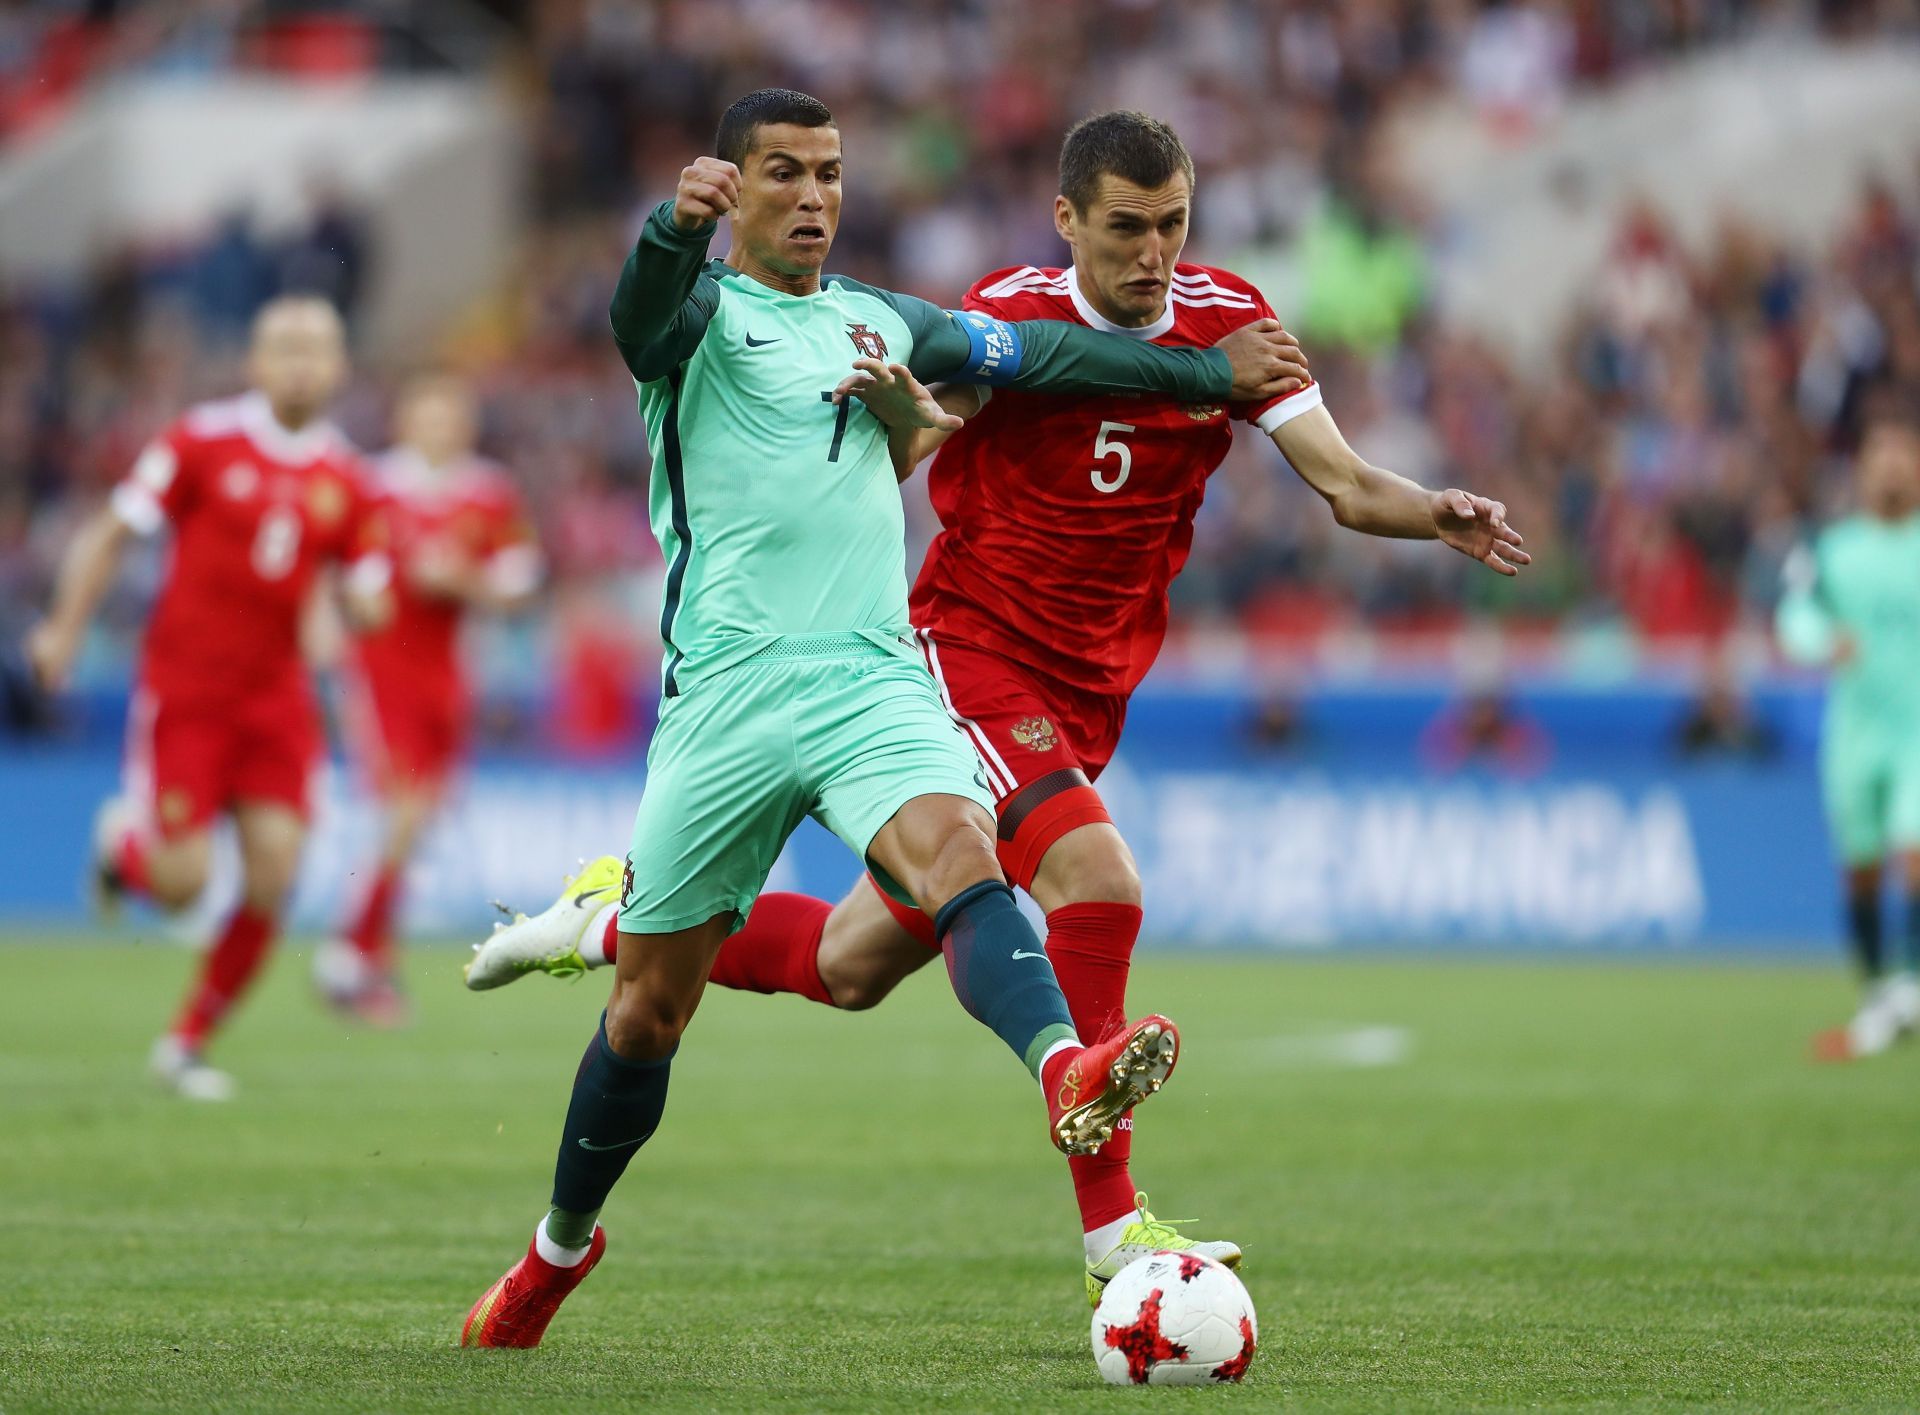 Ronaldo in action against Russia at the FIFA Confederations Cup in 2017